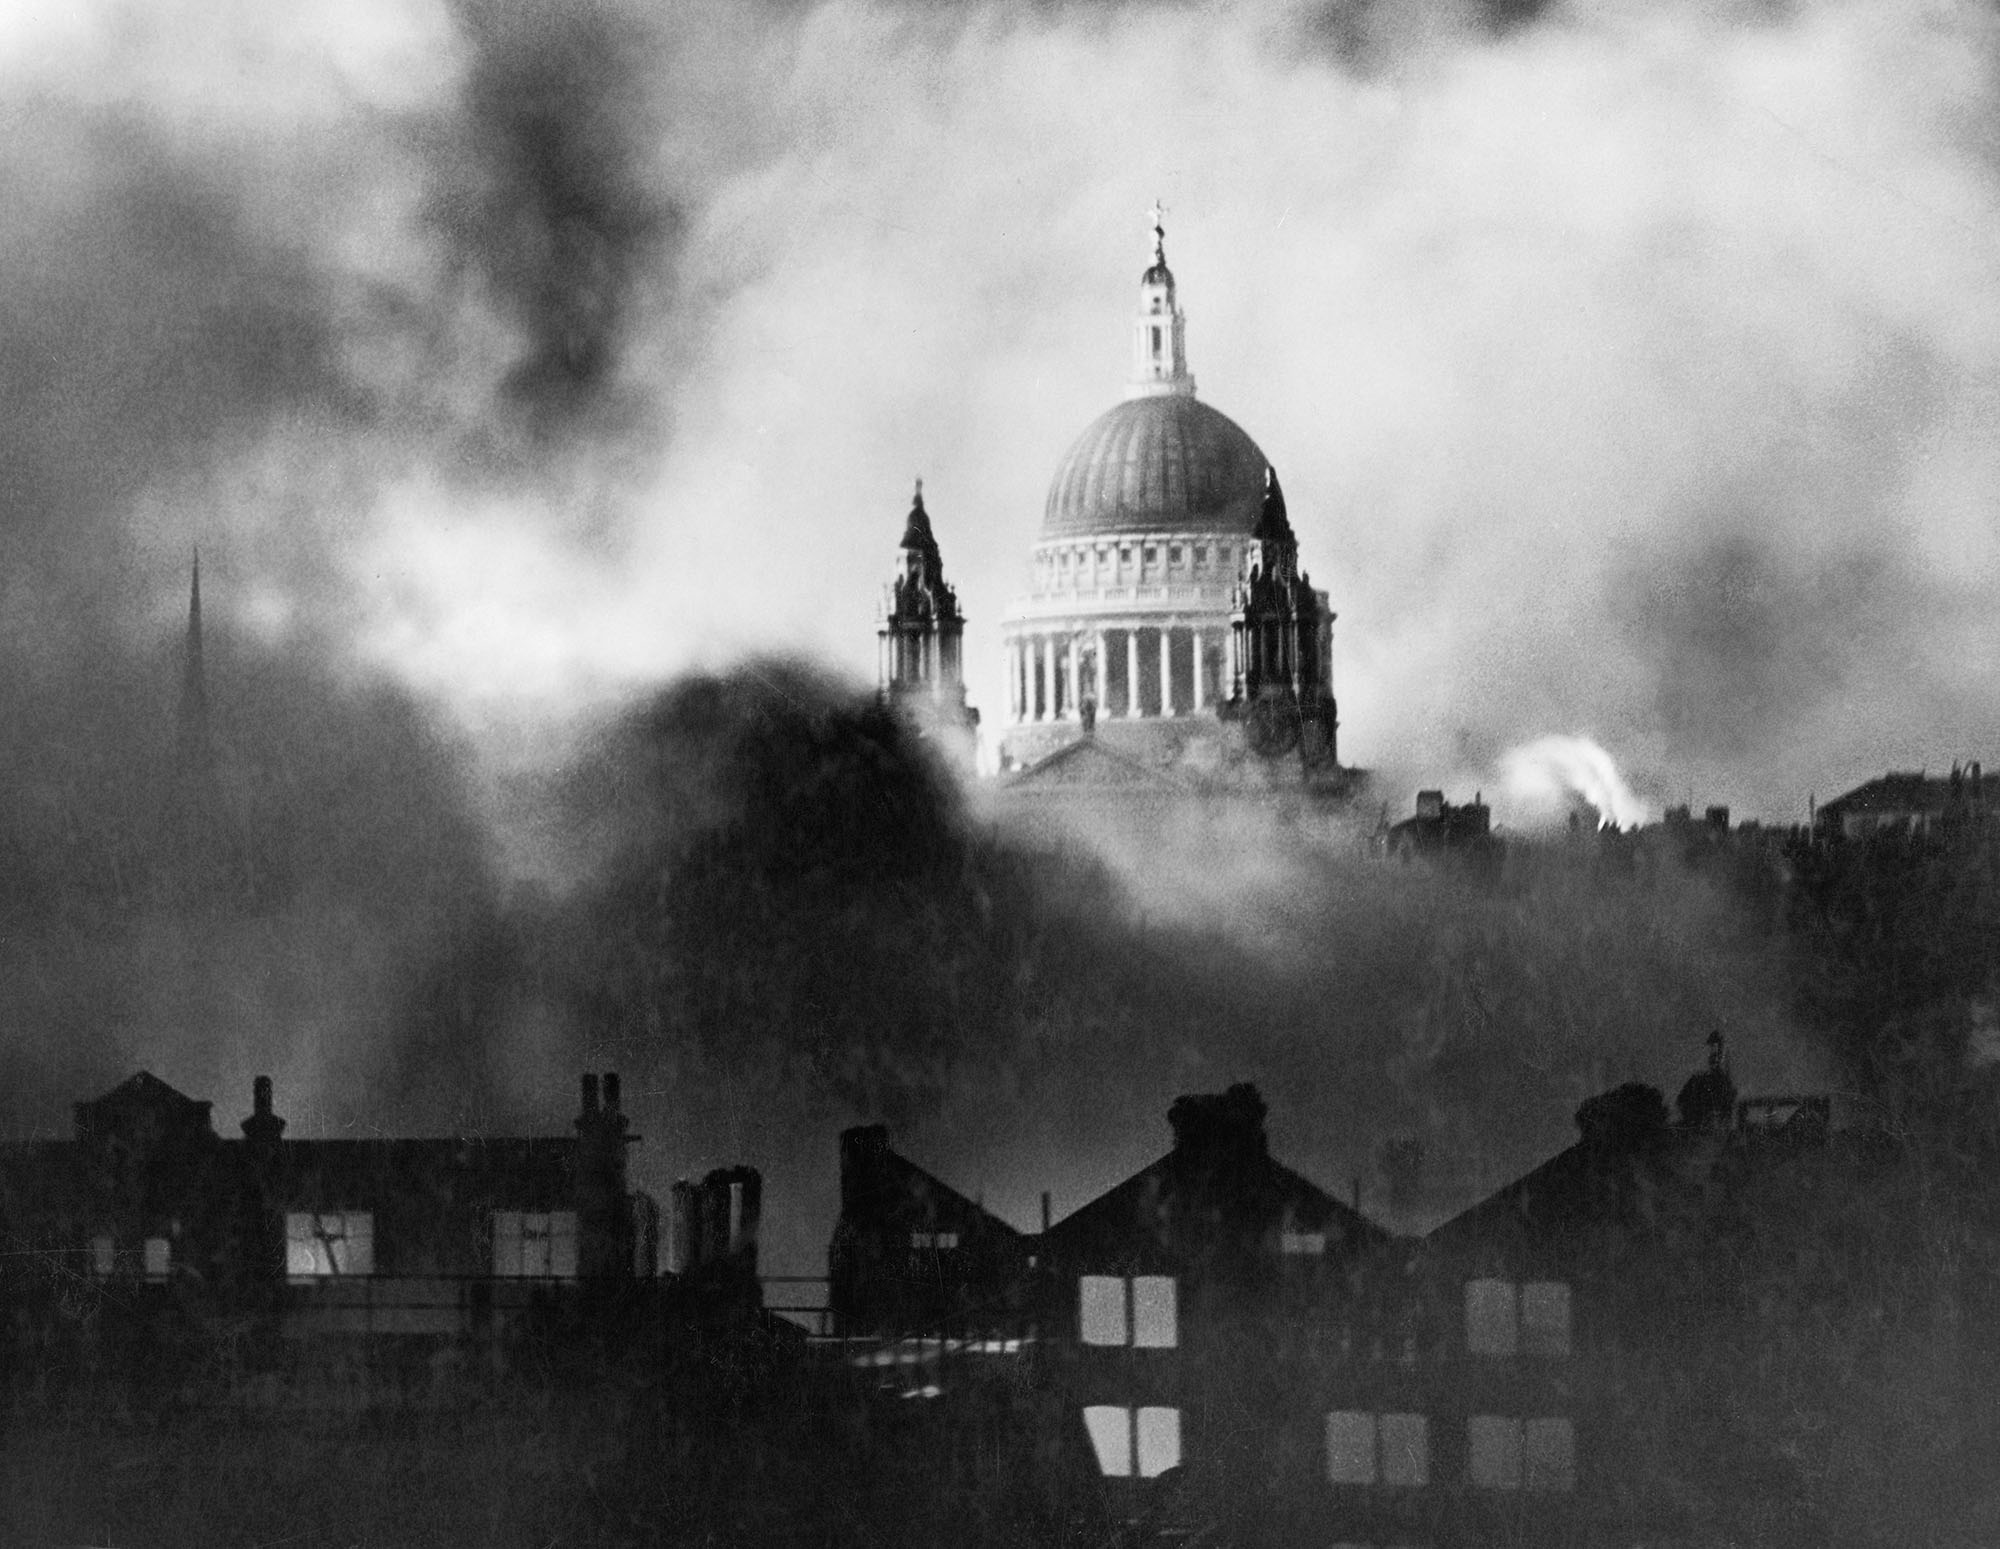 The dome of St Paul's emerging out of a cloud of smoke that engulfs burning buildings in the foreground.